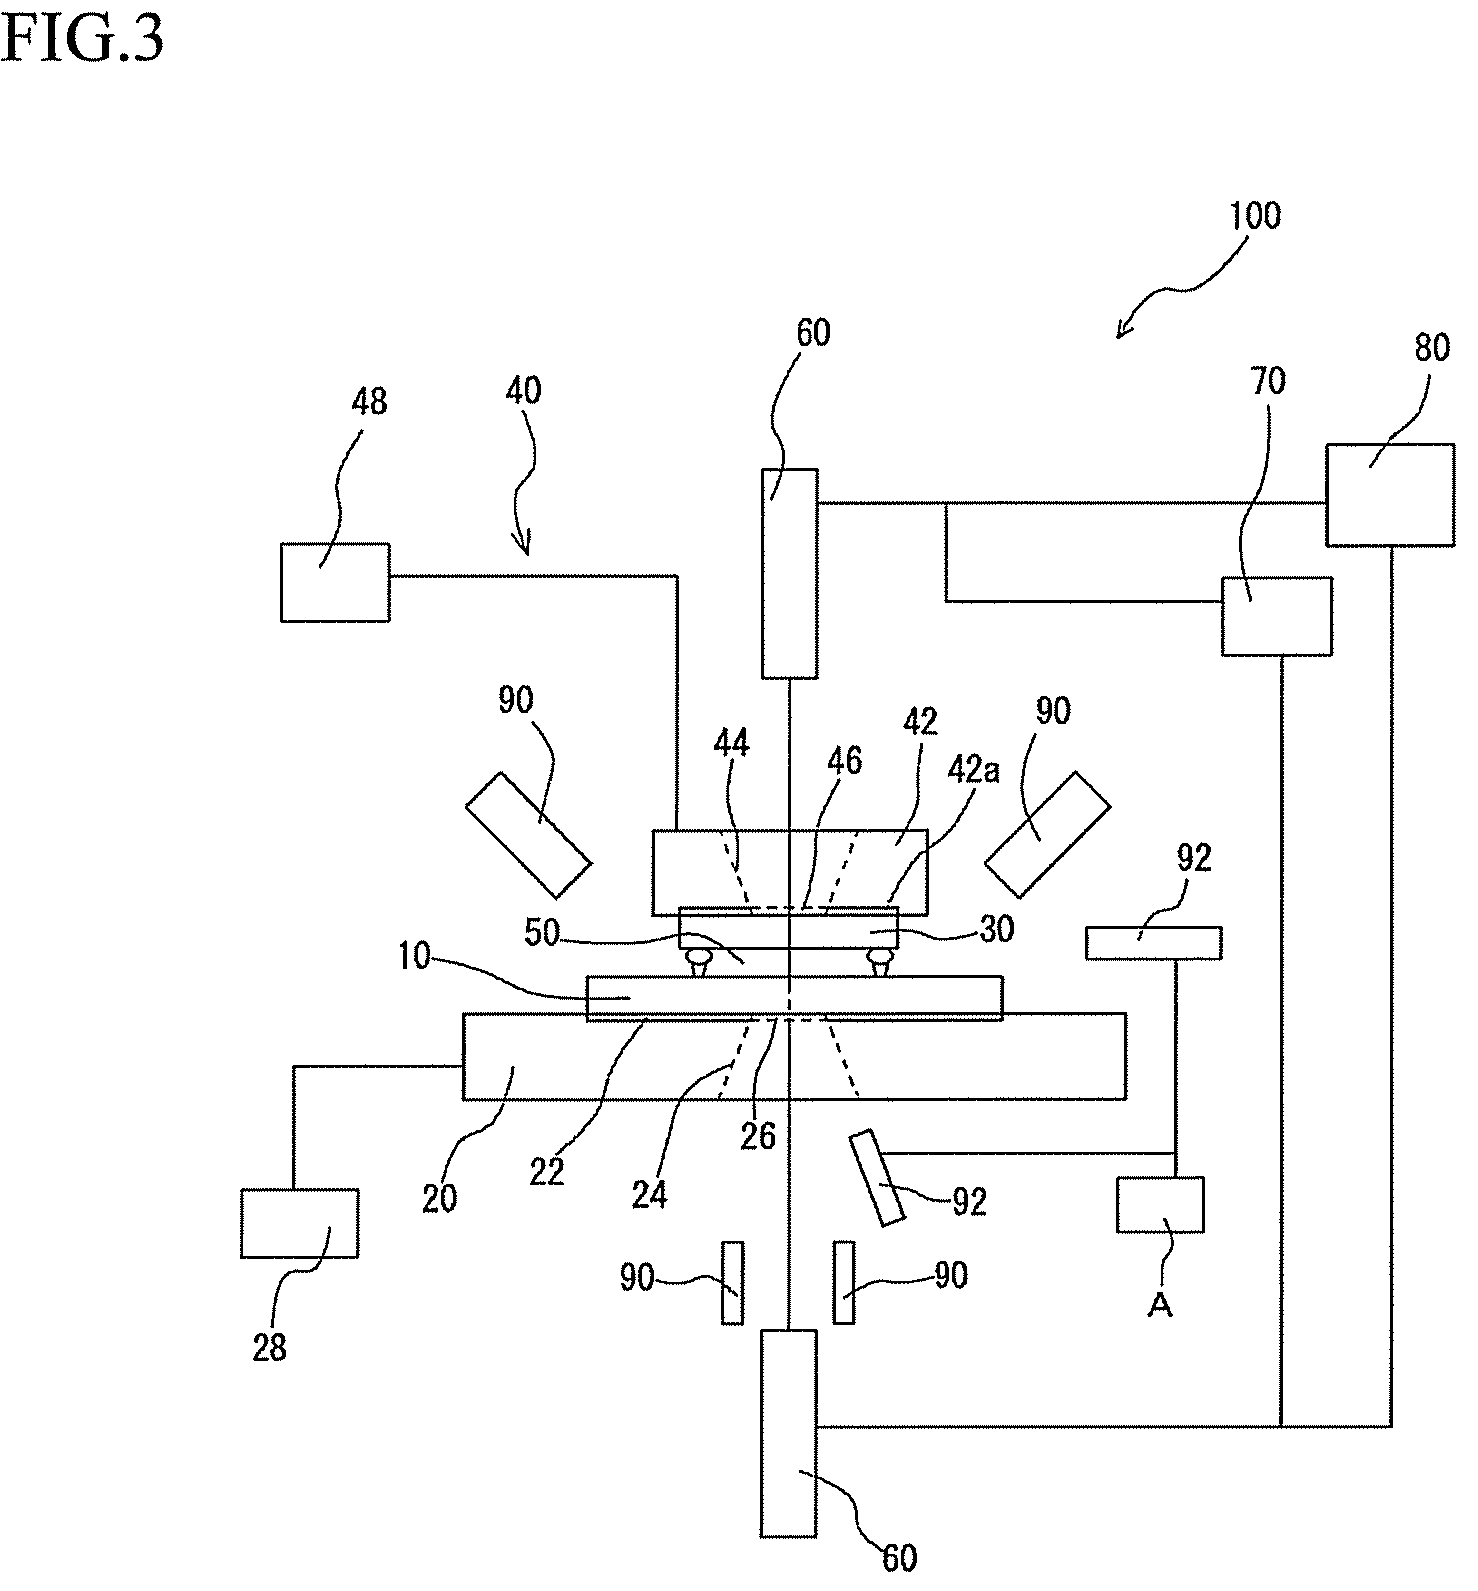 Apparatus for observing an assembled state of components and method of observing an assembled state of components using such apparatus